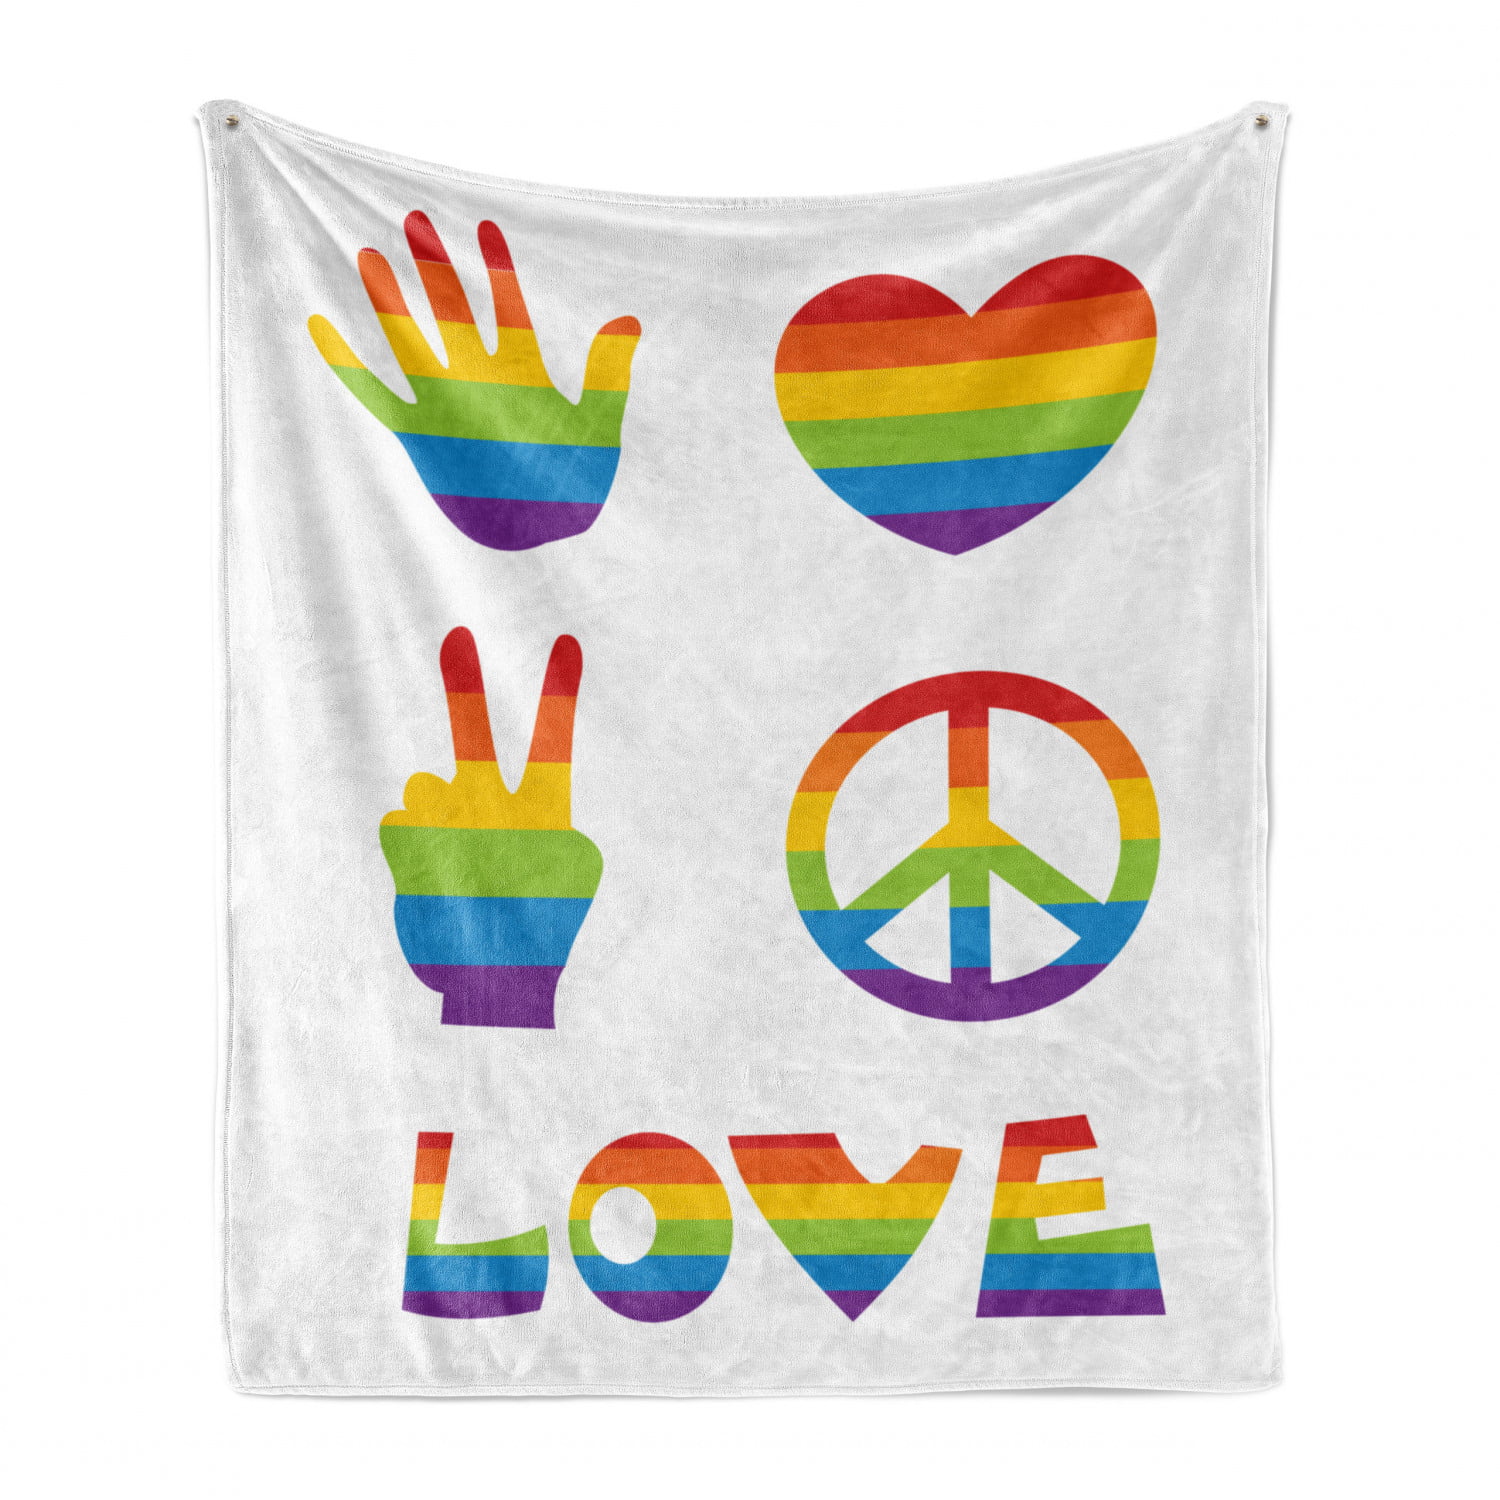 Colorful LGBT Symbol Pride Flag Rainbow Comfortable Throw Blanket Plush Soft Cozy Quilt Bedding Decor Bedroom Decorations Wearable 